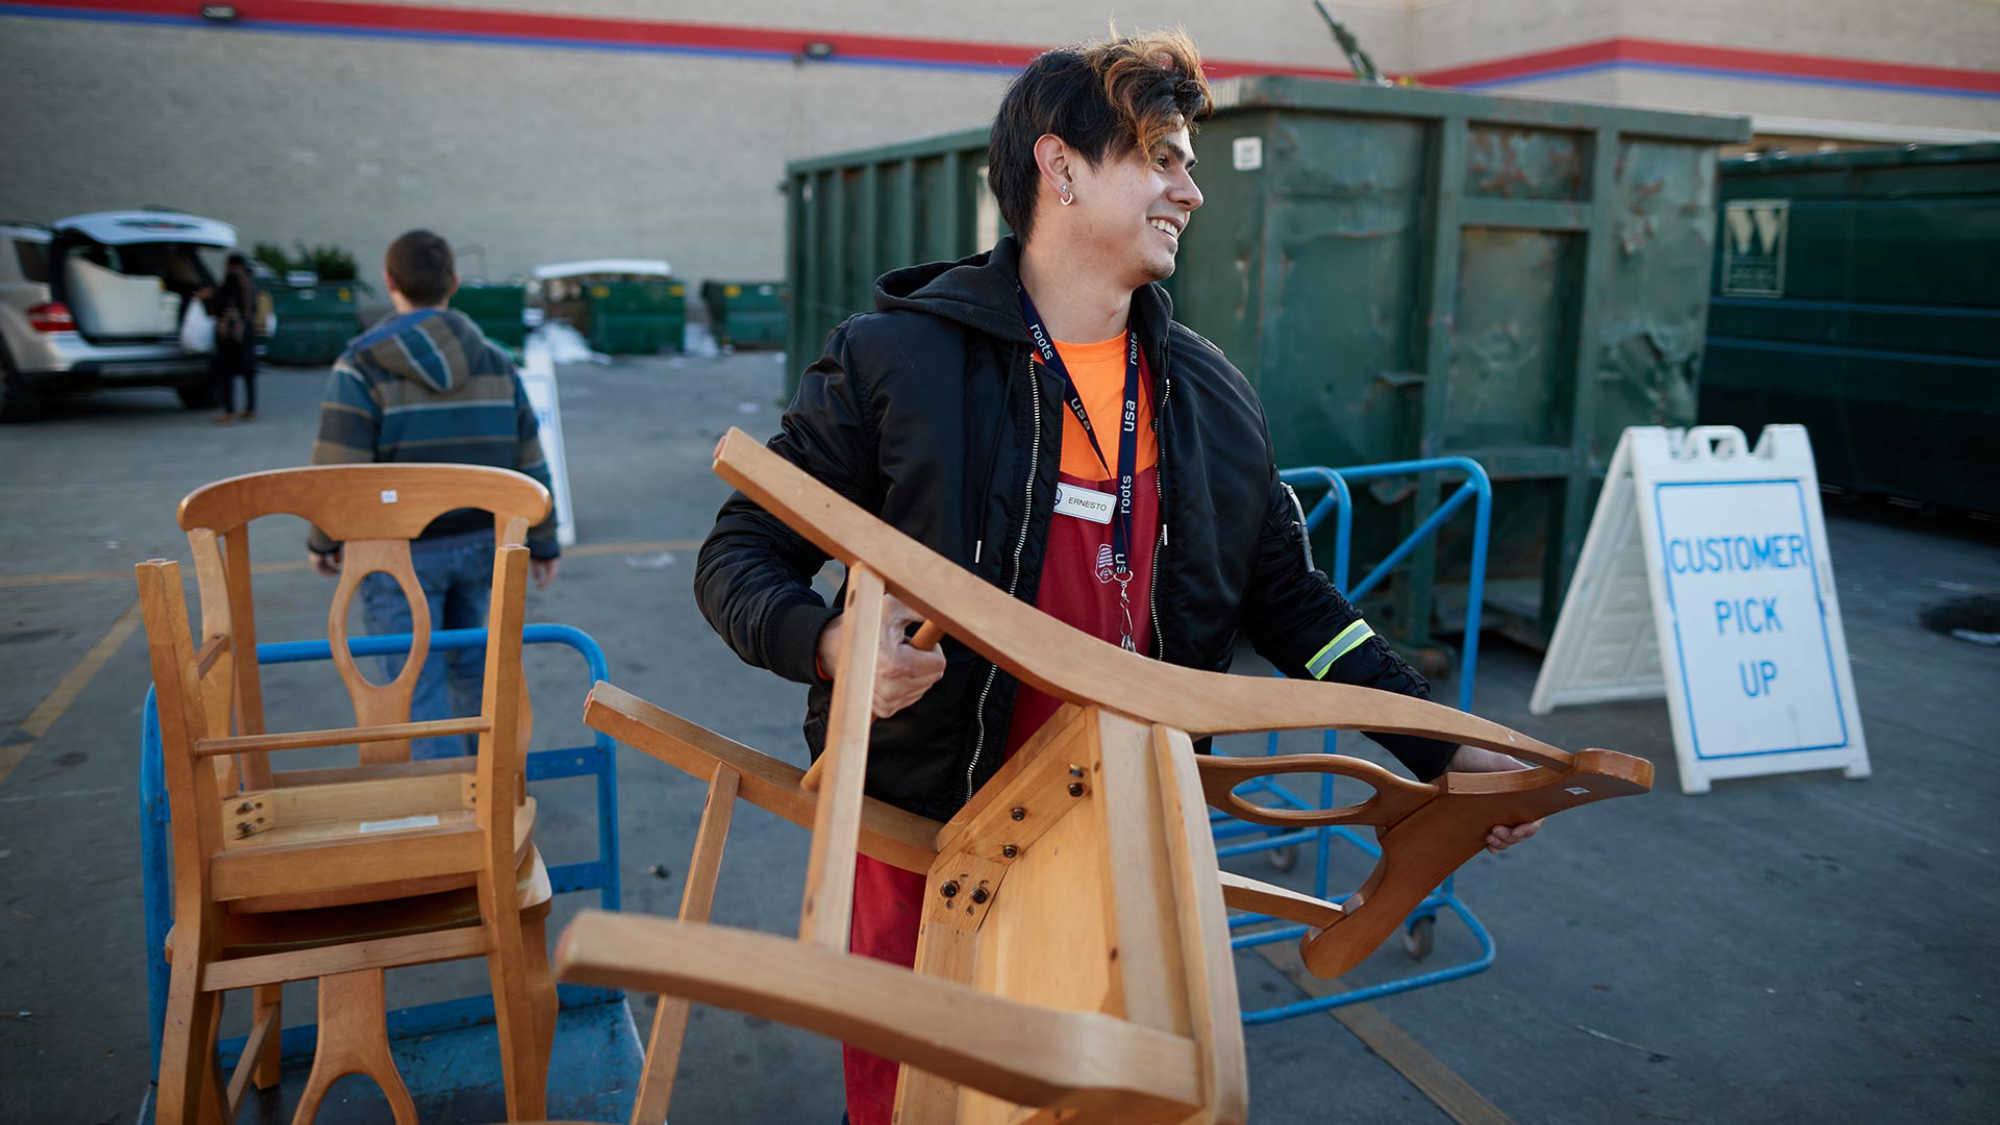 Associate Ernesto helps a customer pick up a donated chair